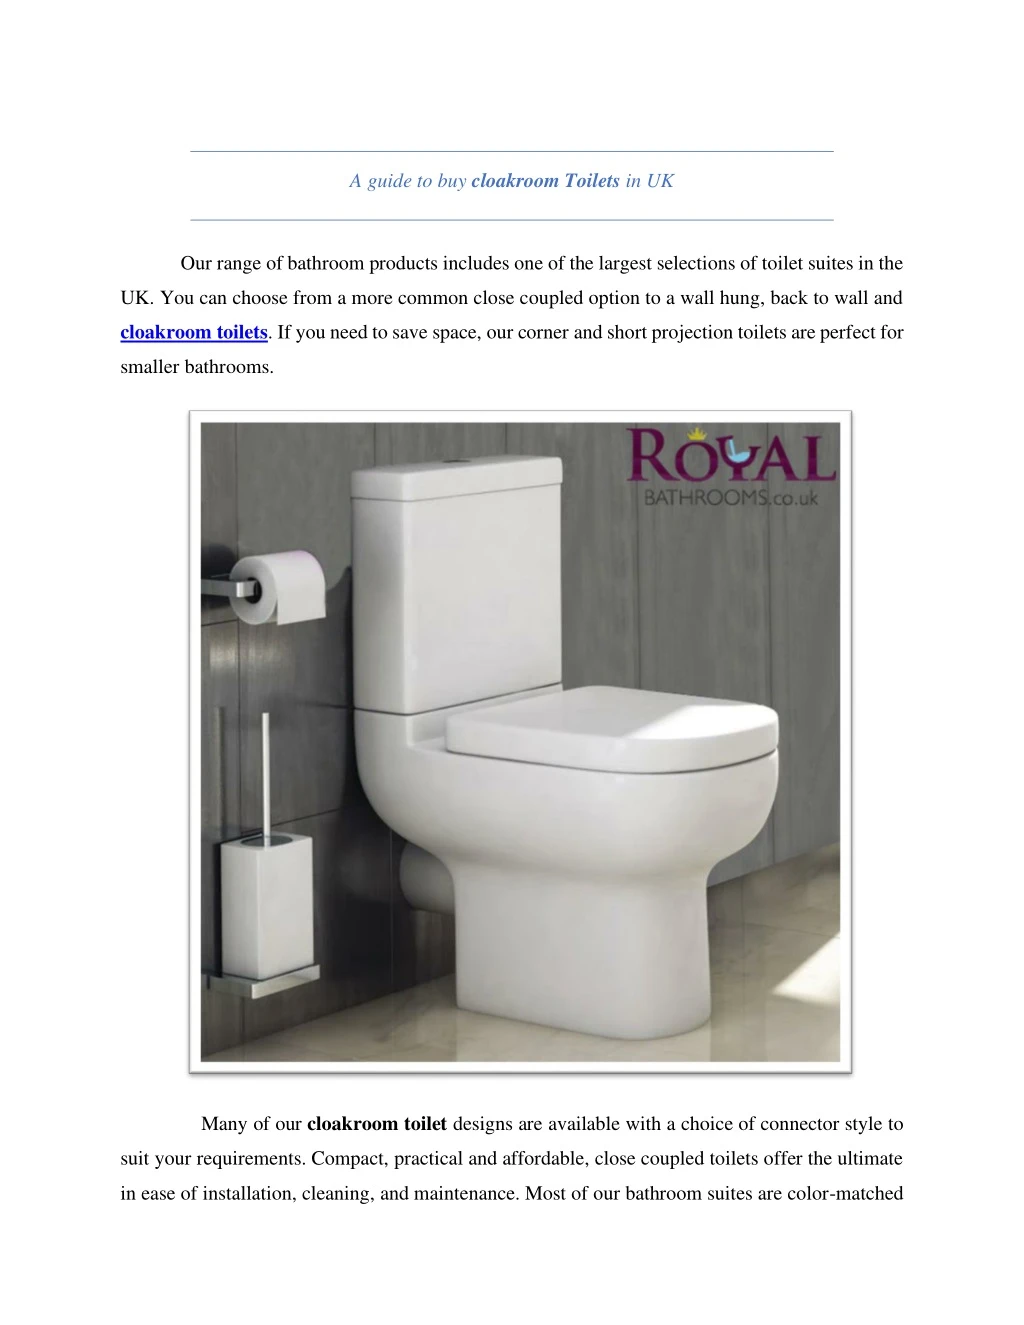 a guide to buy cloakroom toilets in uk